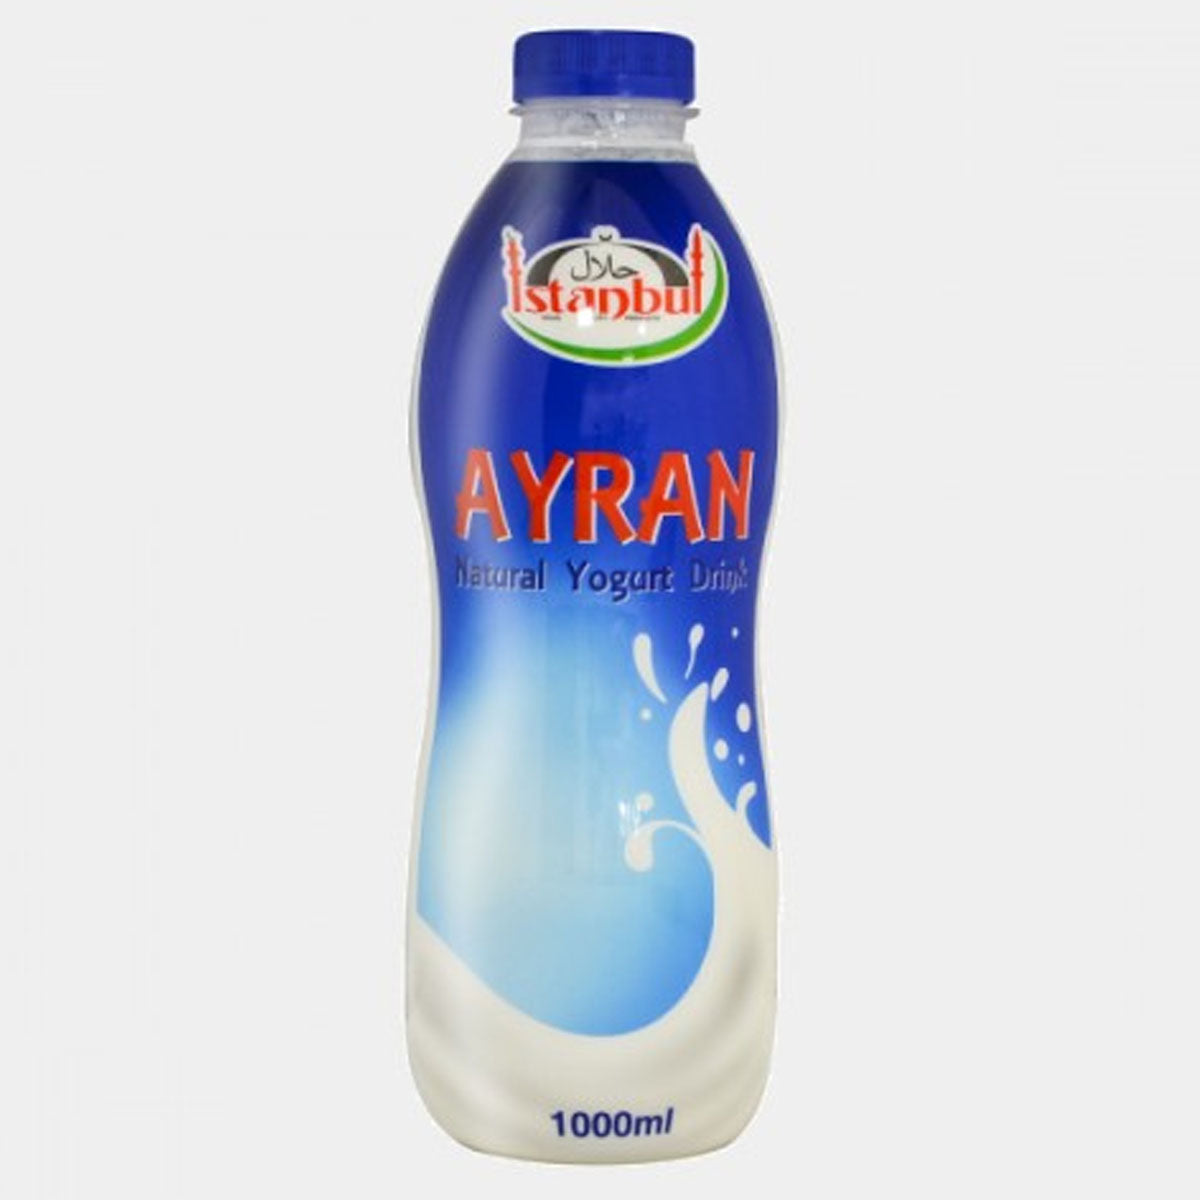 Istanbul - Ayran Natural Yogurt Drink - 1000ml in a bottle on a white background.